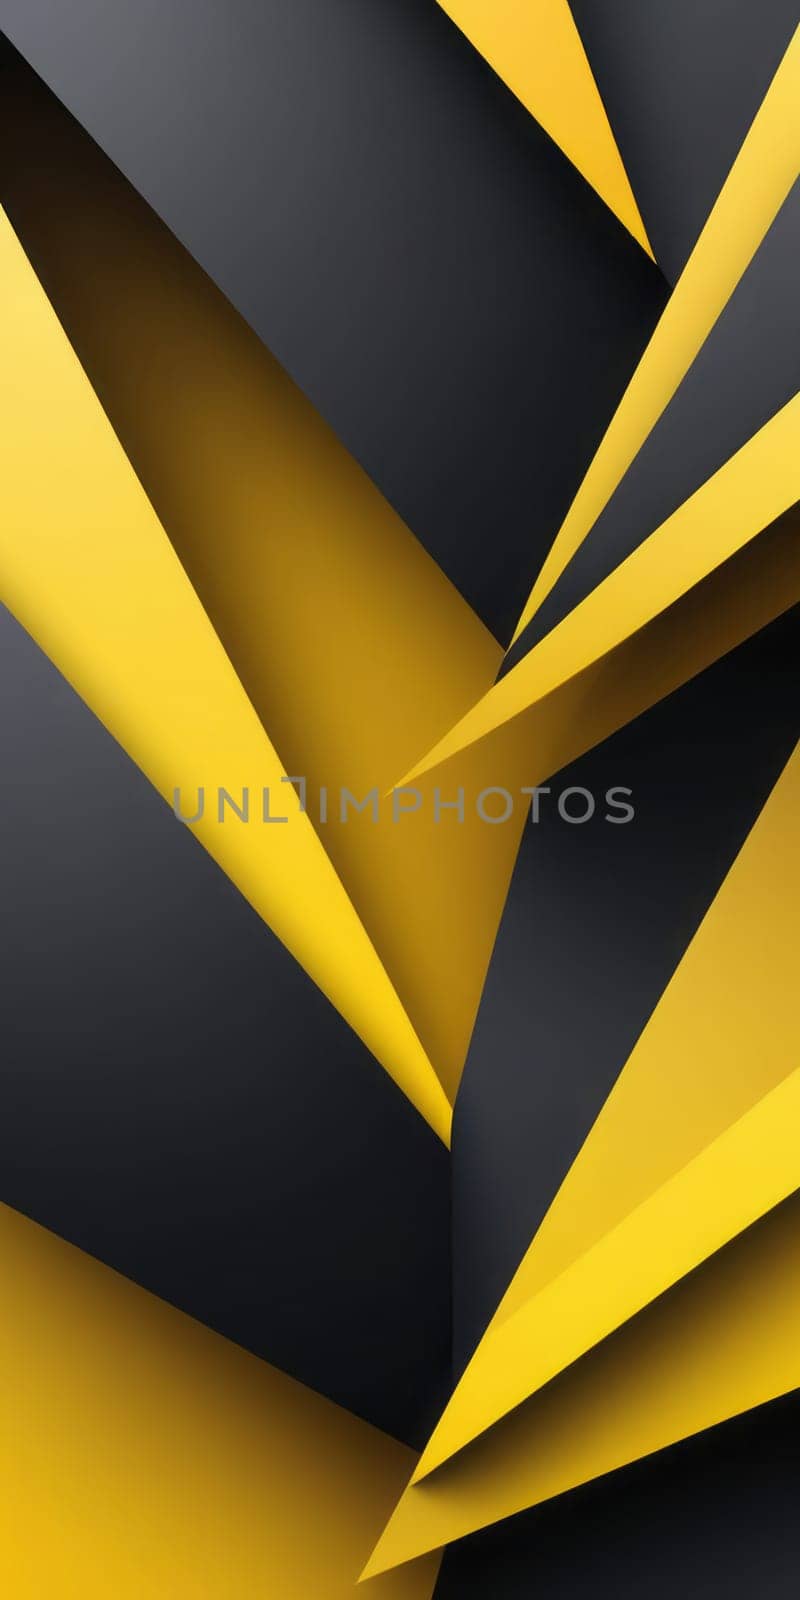 Layered Shapes in Yellow and Black by nkotlyar